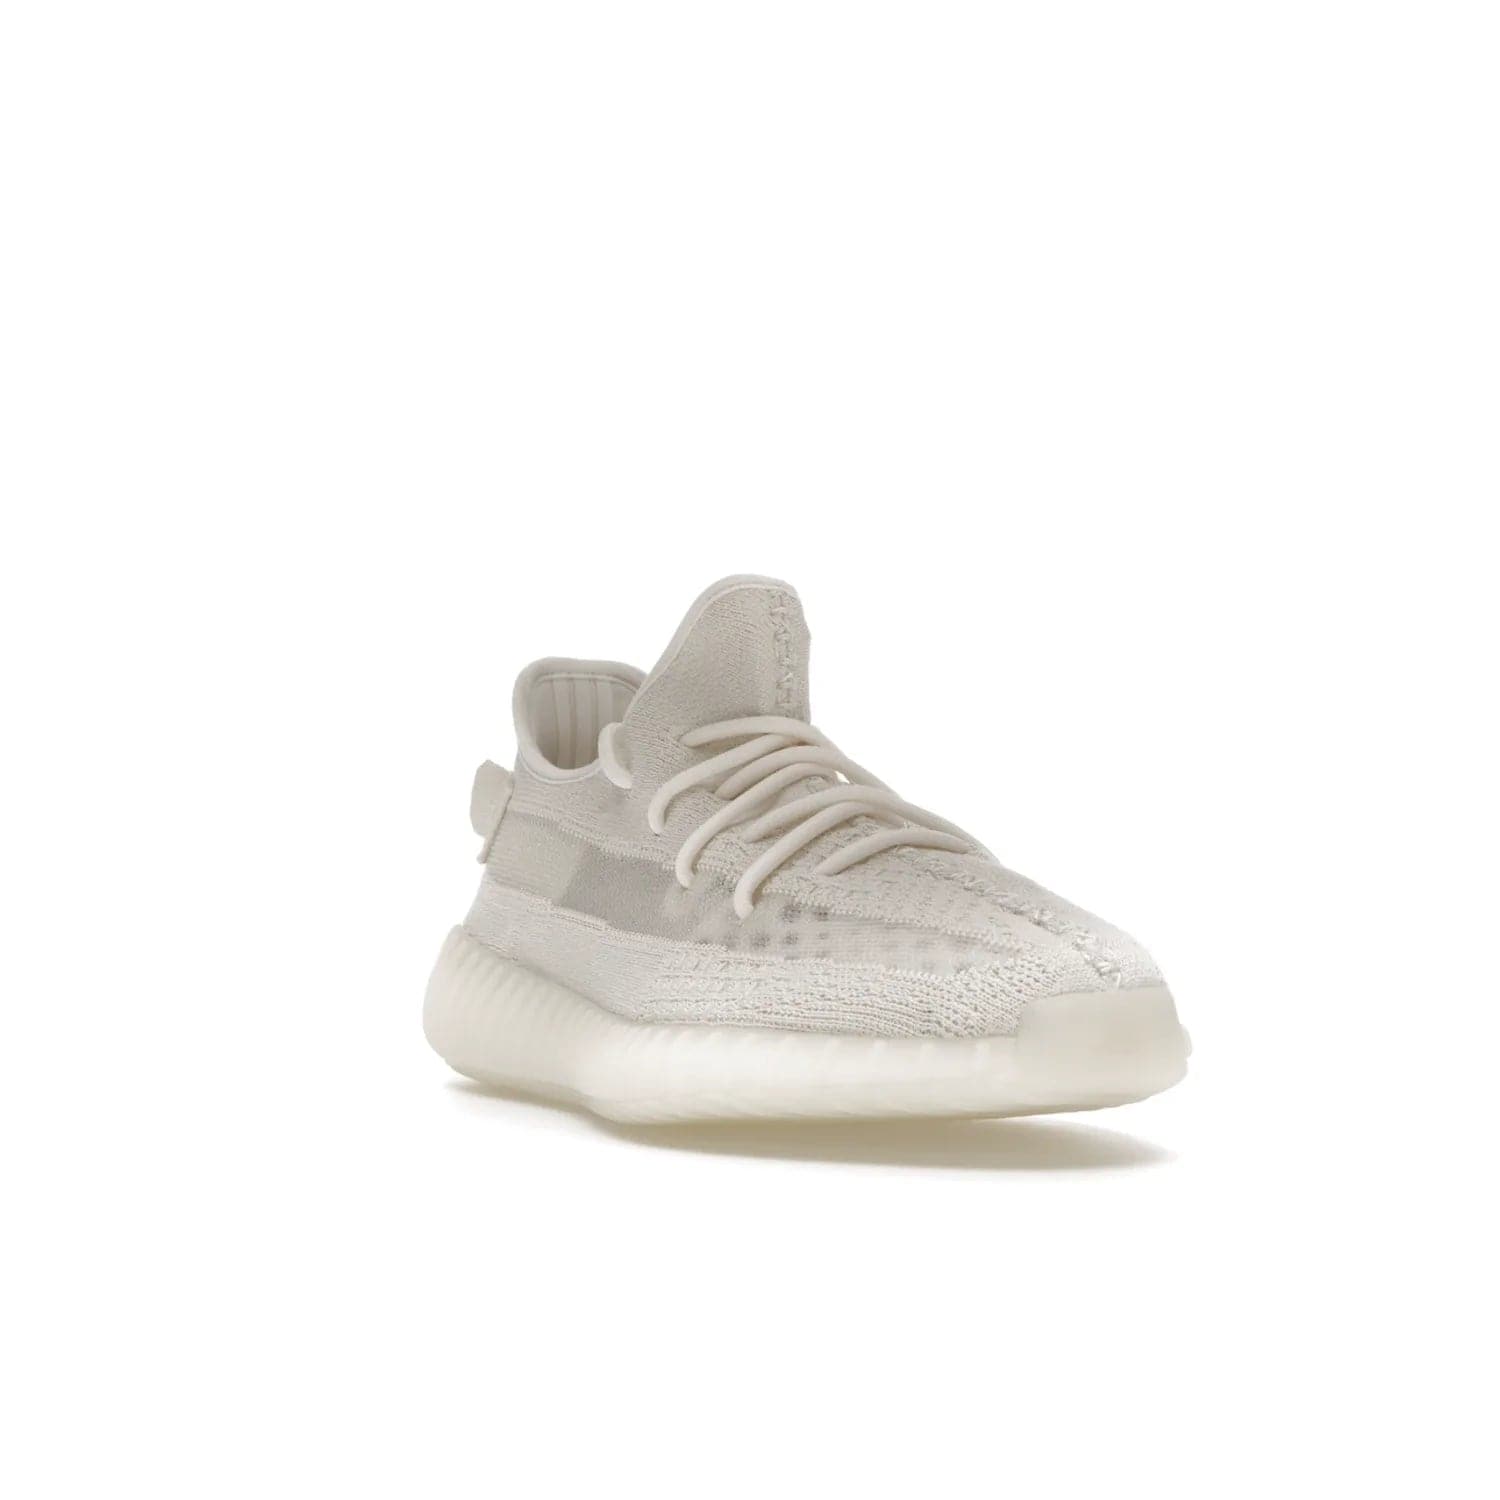 adidas Yeezy Boost 350 V2 Bone - Image 7 - Only at www.BallersClubKickz.com - Grab the stylish and comfortable adidas Yeezy Boost 350 V2 Bone in March 2022. This sneaker features a triple white Primeknit upper, mesh side stripes and canvas heel tabs, sitting atop a semi-translucent sole with Boost technology. Sure to keep your feet comfortable and stylish!